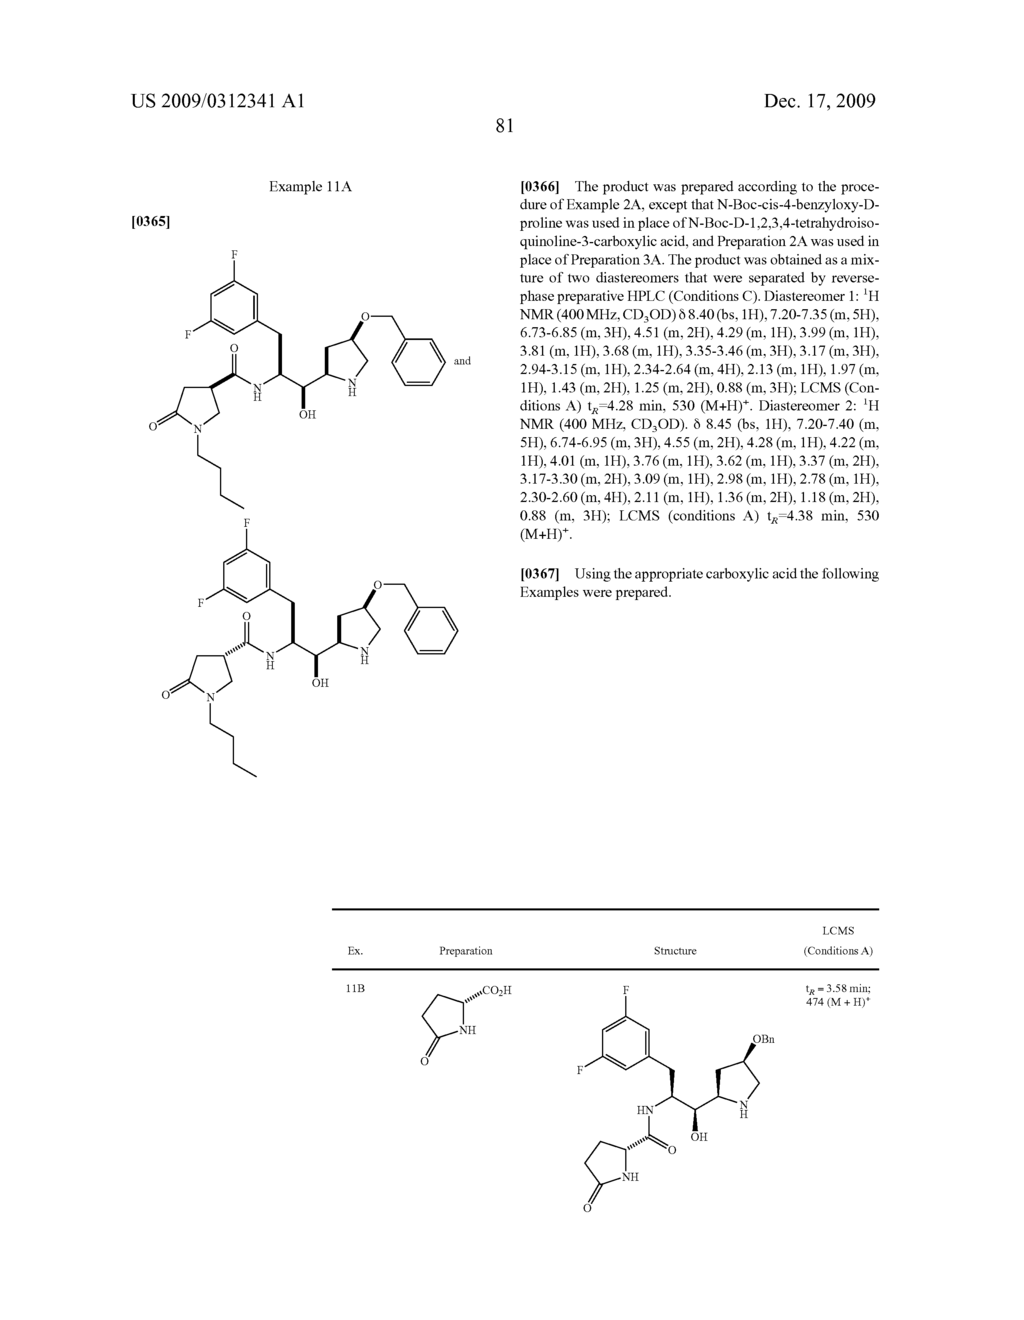 CYCLIC AMINE BACE-1 INHIBITORS HAVING A HETEROCYCLIC SUBSTITUENT - diagram, schematic, and image 82